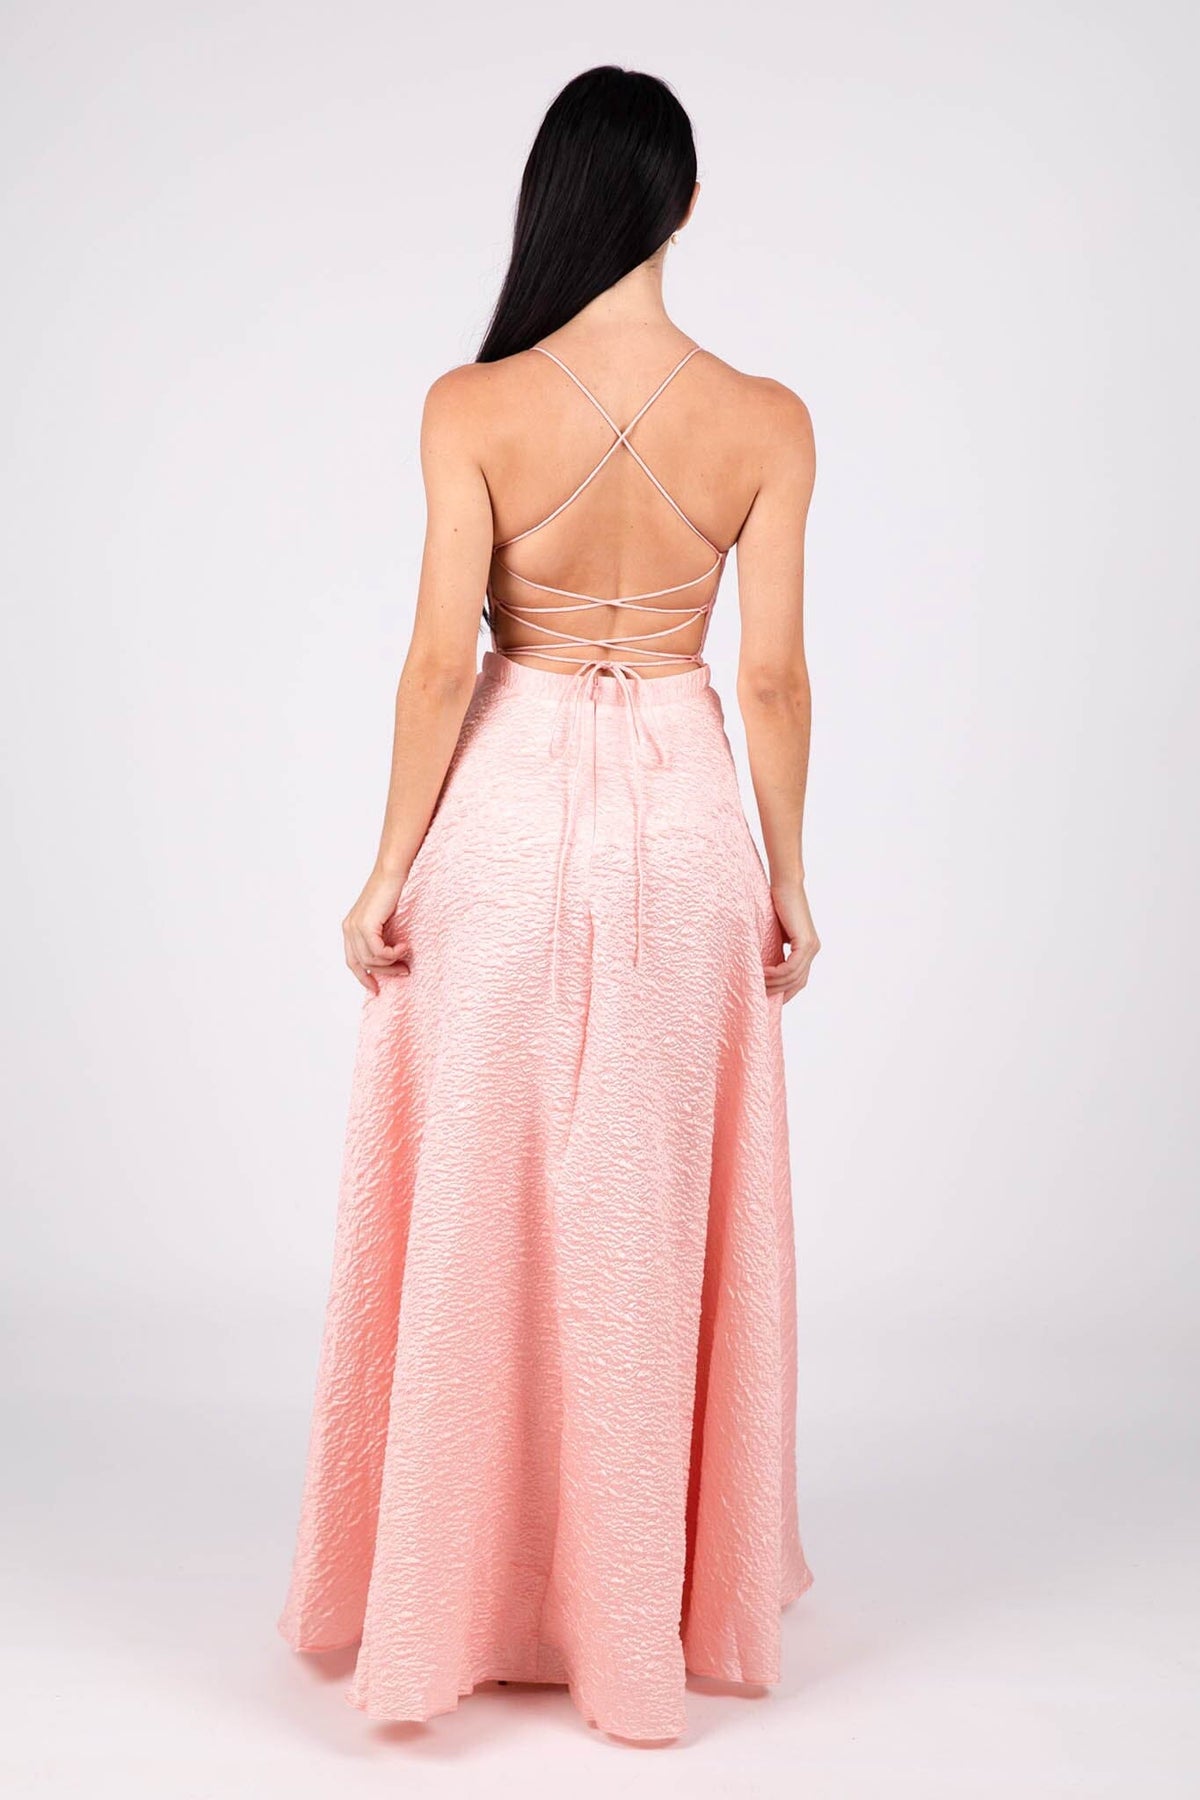 Lace Up Open Back of Light Pink A-line Ball Gown